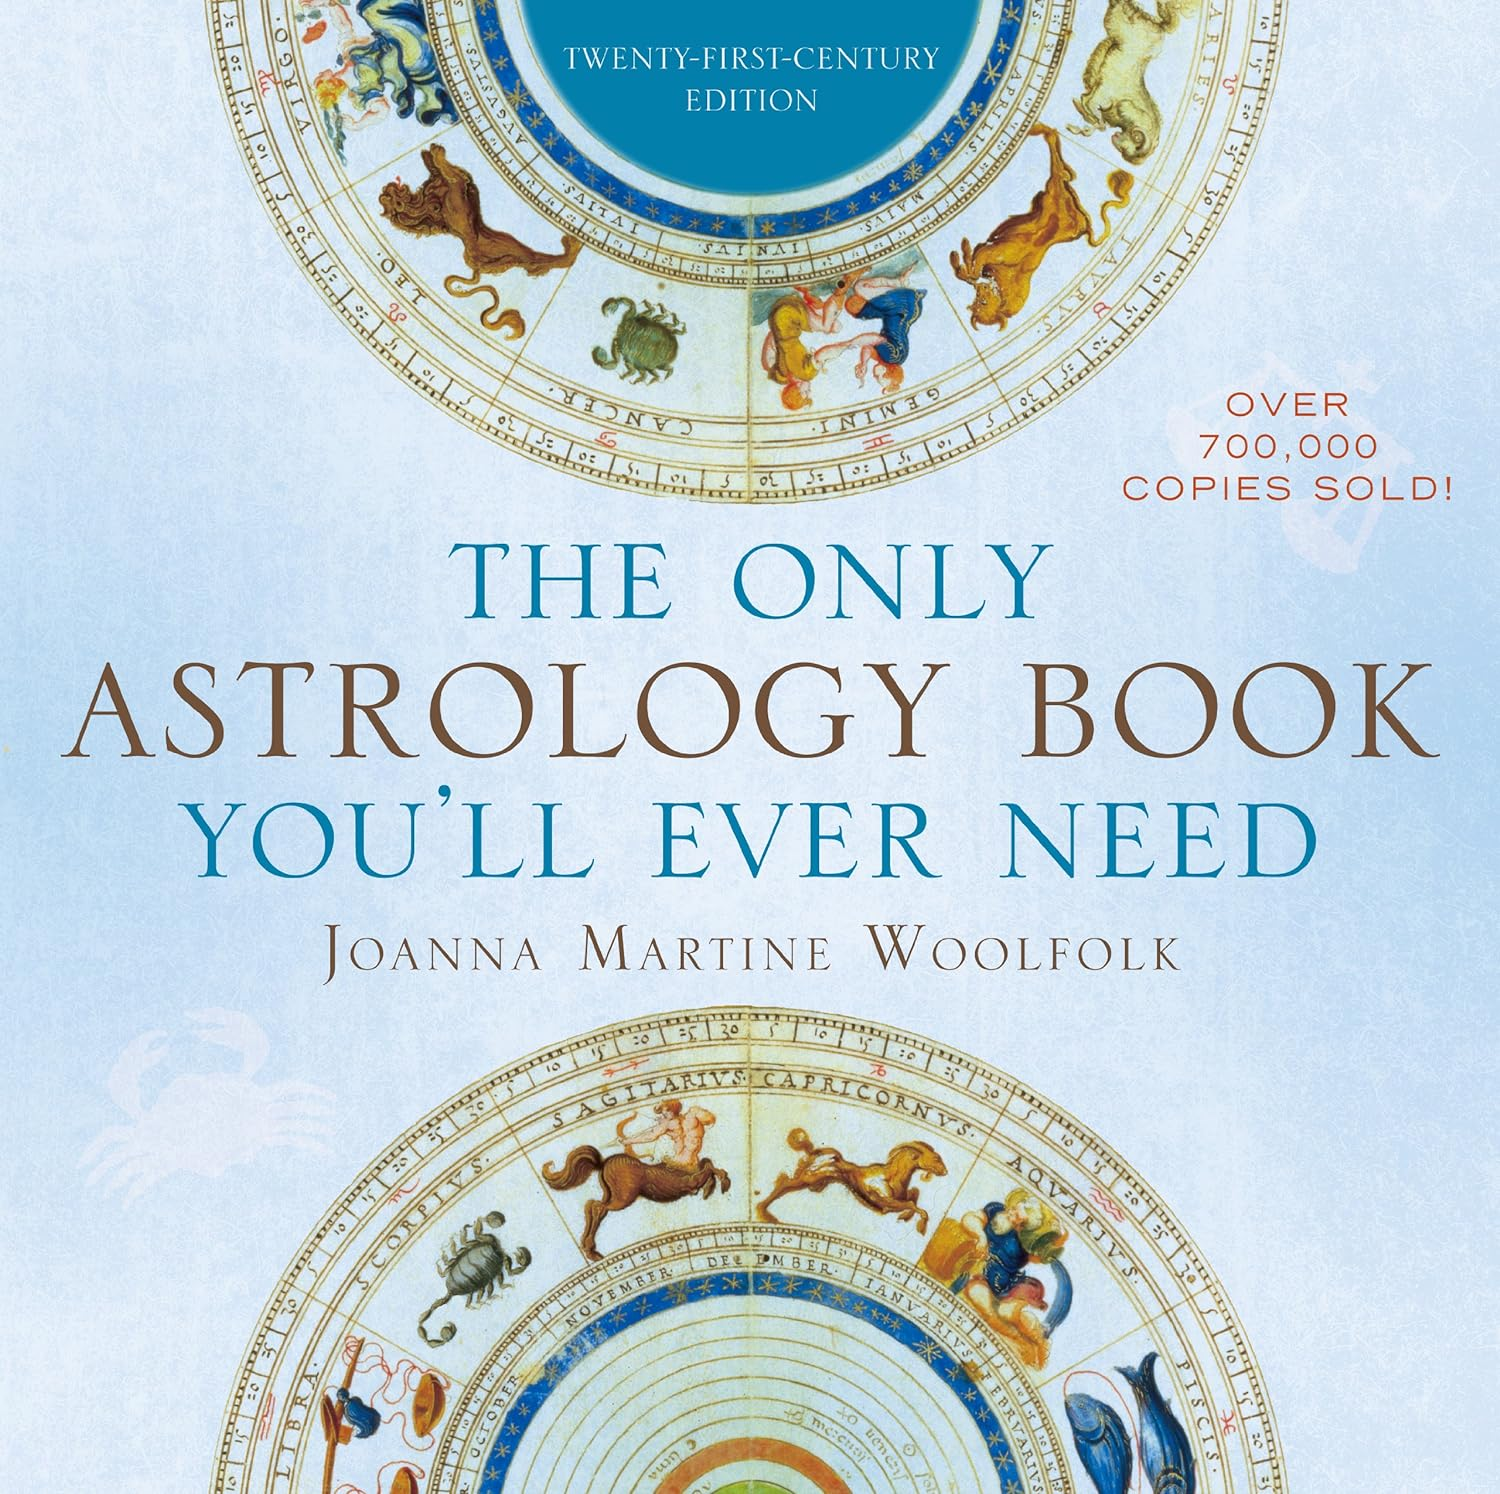 For the complete language of astrology, don't sleep on Woolfolk's book. Customer reviews are absolutely glowing.